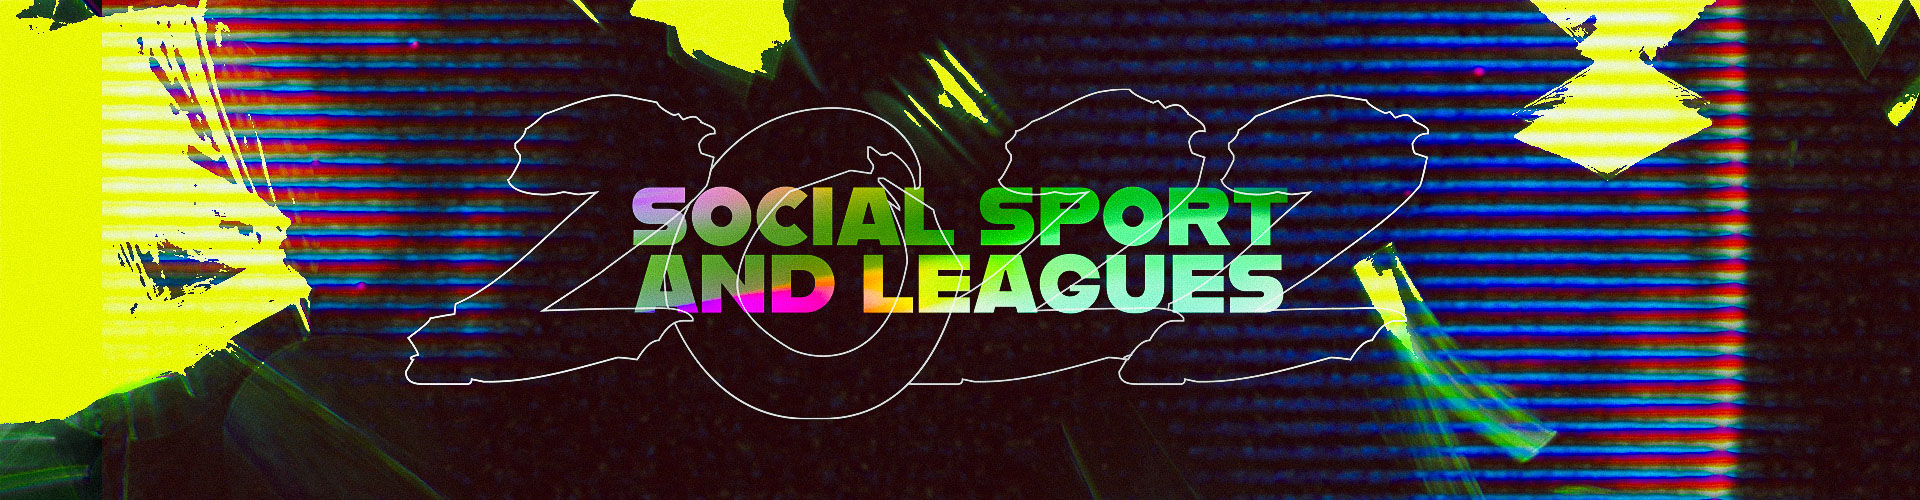 Social sport and leages 2022